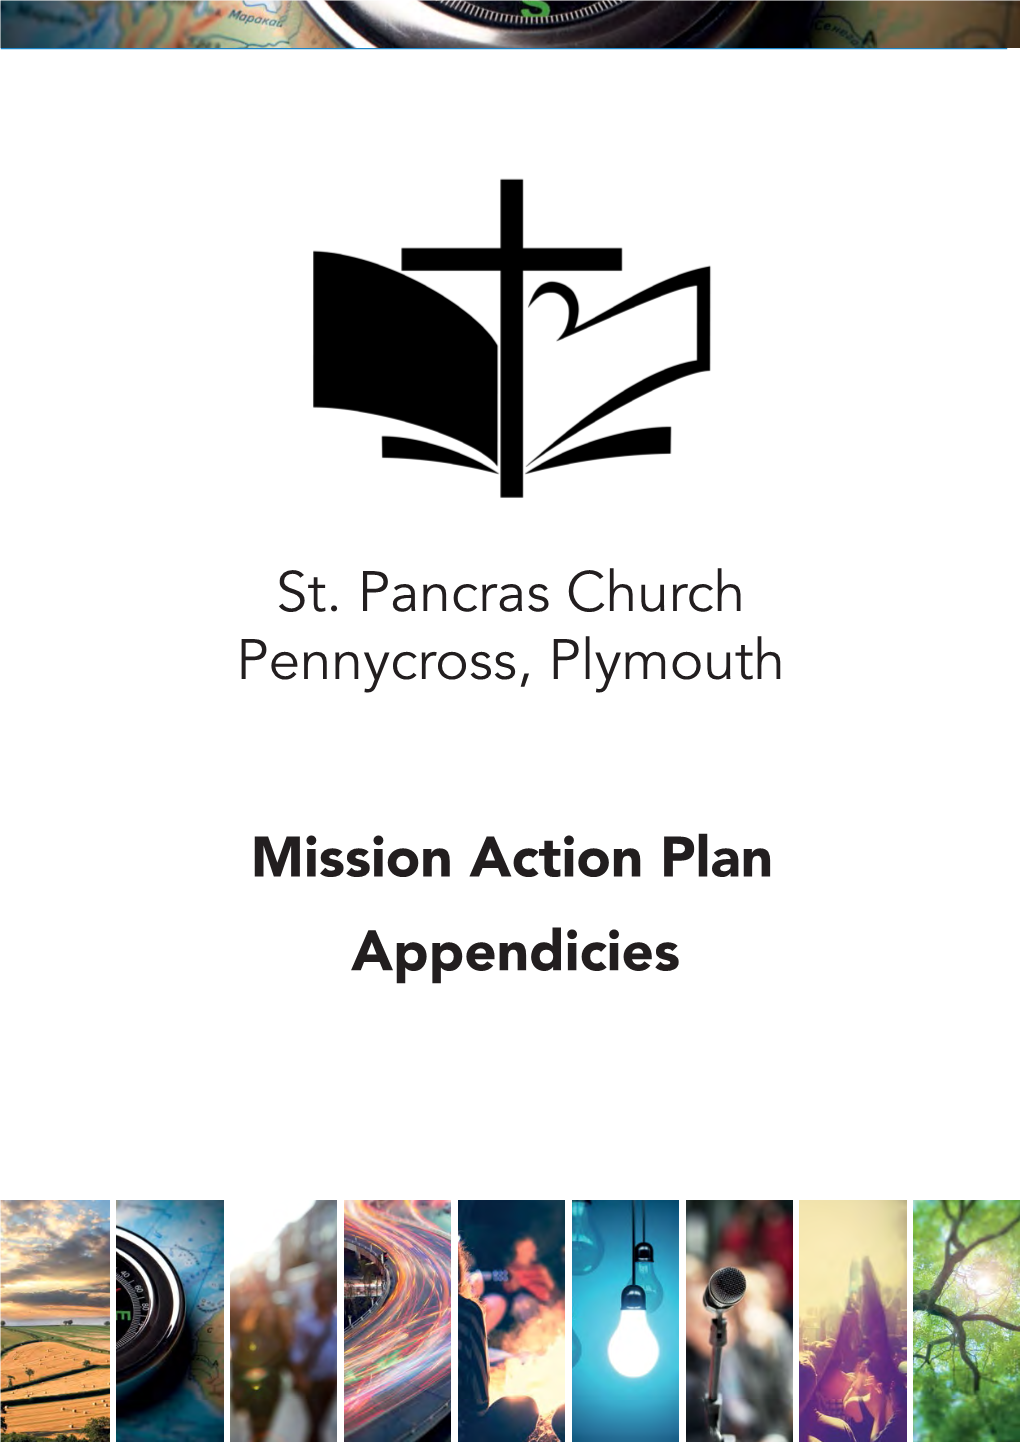 St. Pancras Church Pennycross, Plymouth Mission Action Plan Appendicies